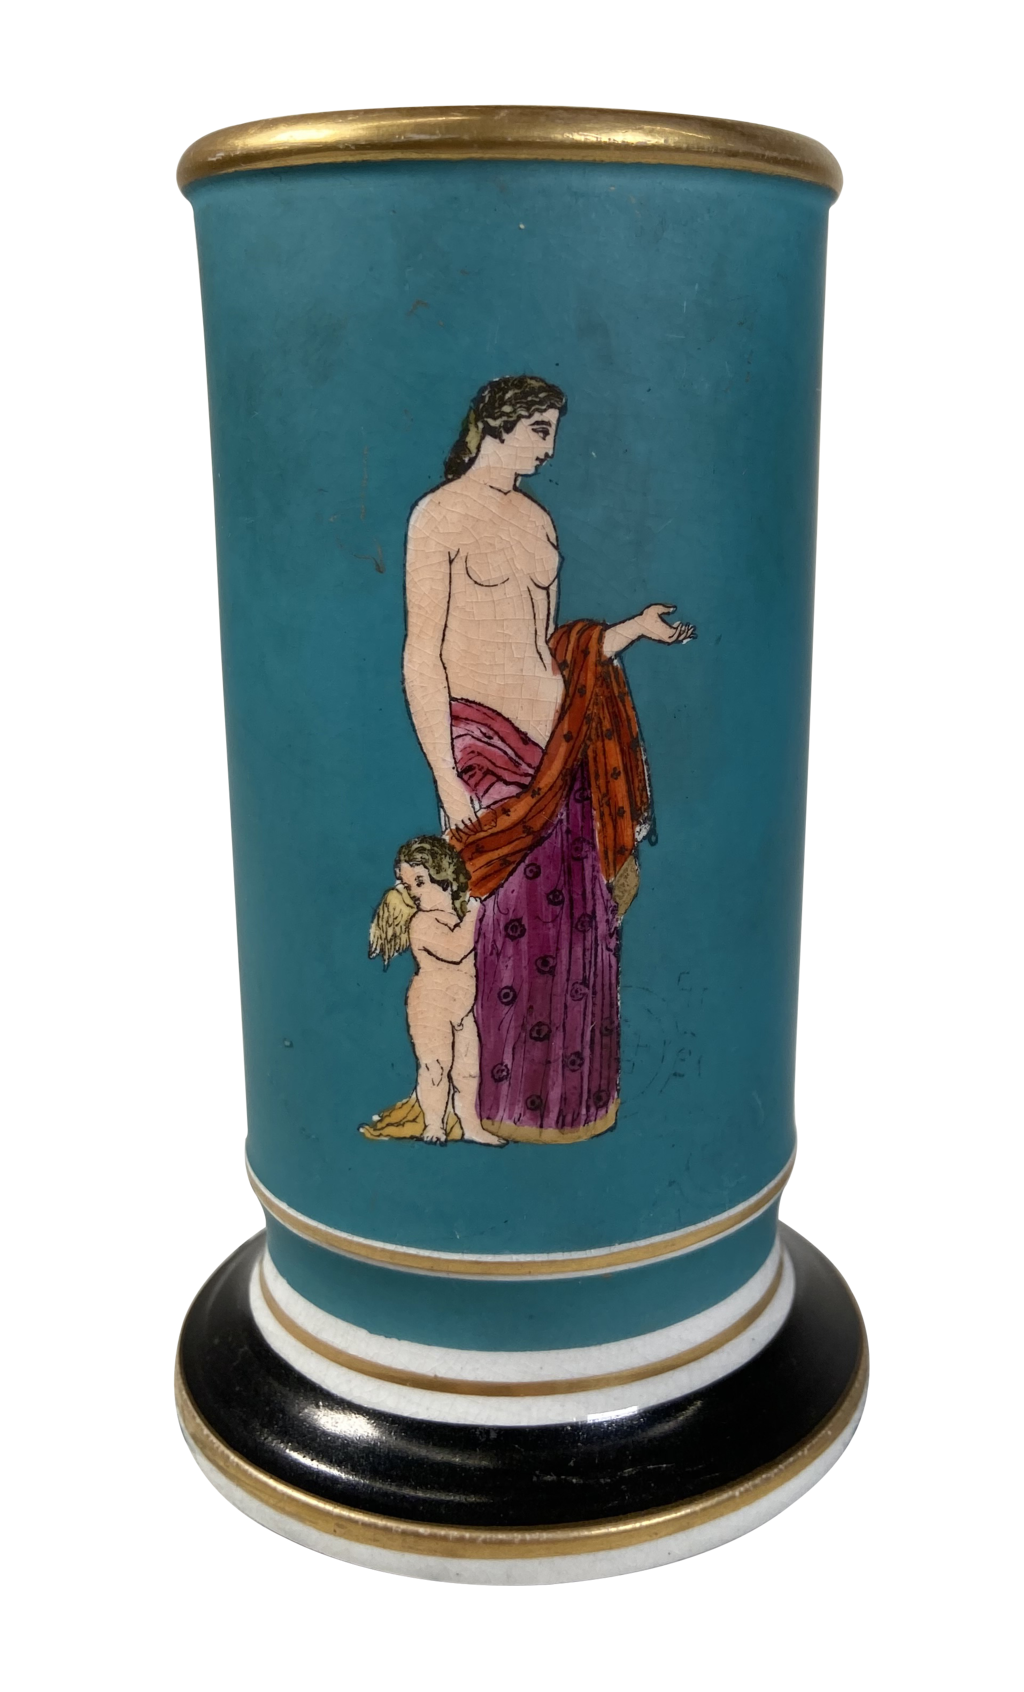 Prattware Spill Vase with Neo-Classical Figures